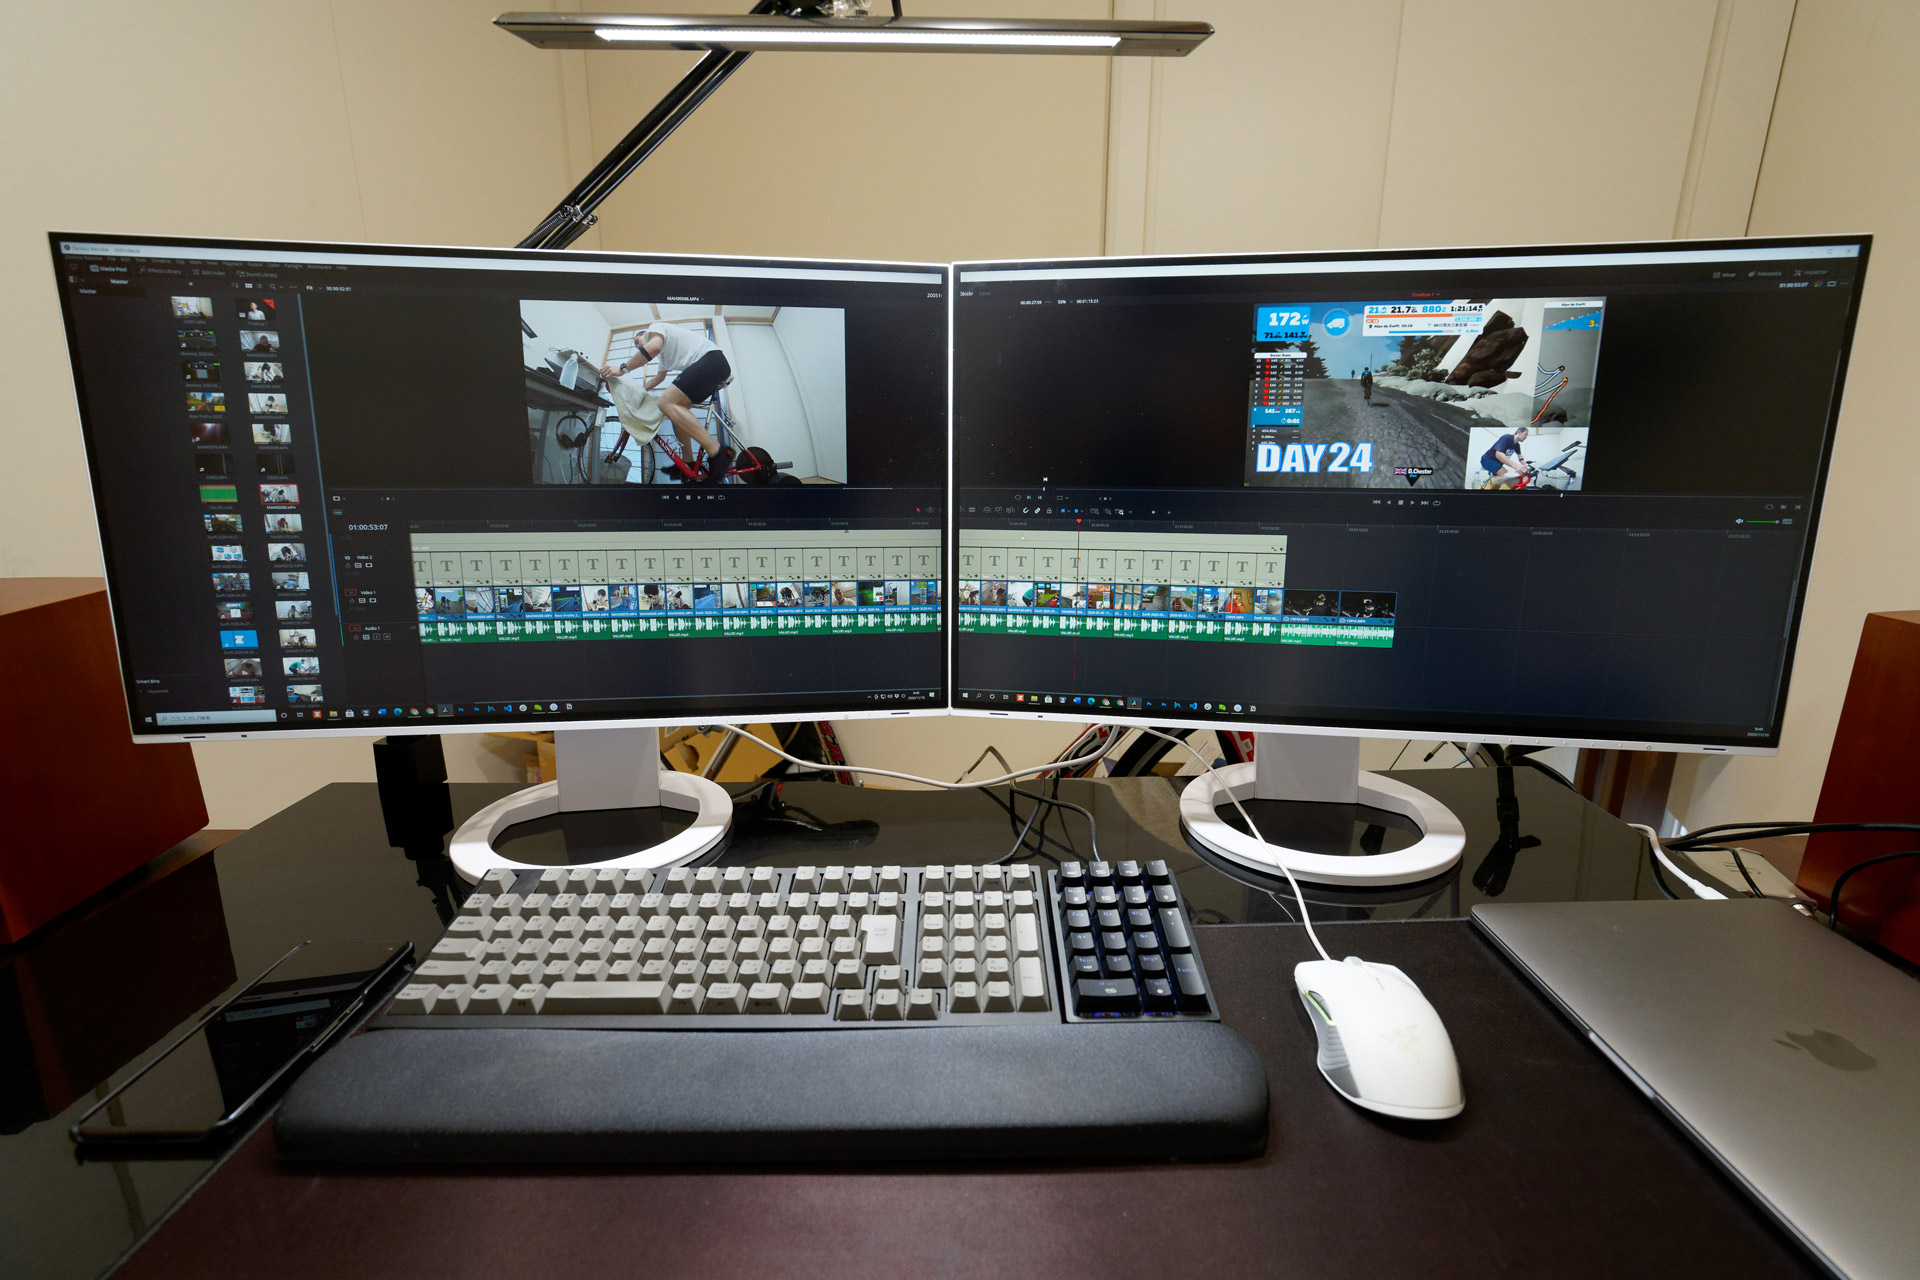 Efficiently editing video over an extensive workspace of 5120 x 1440 pixels.